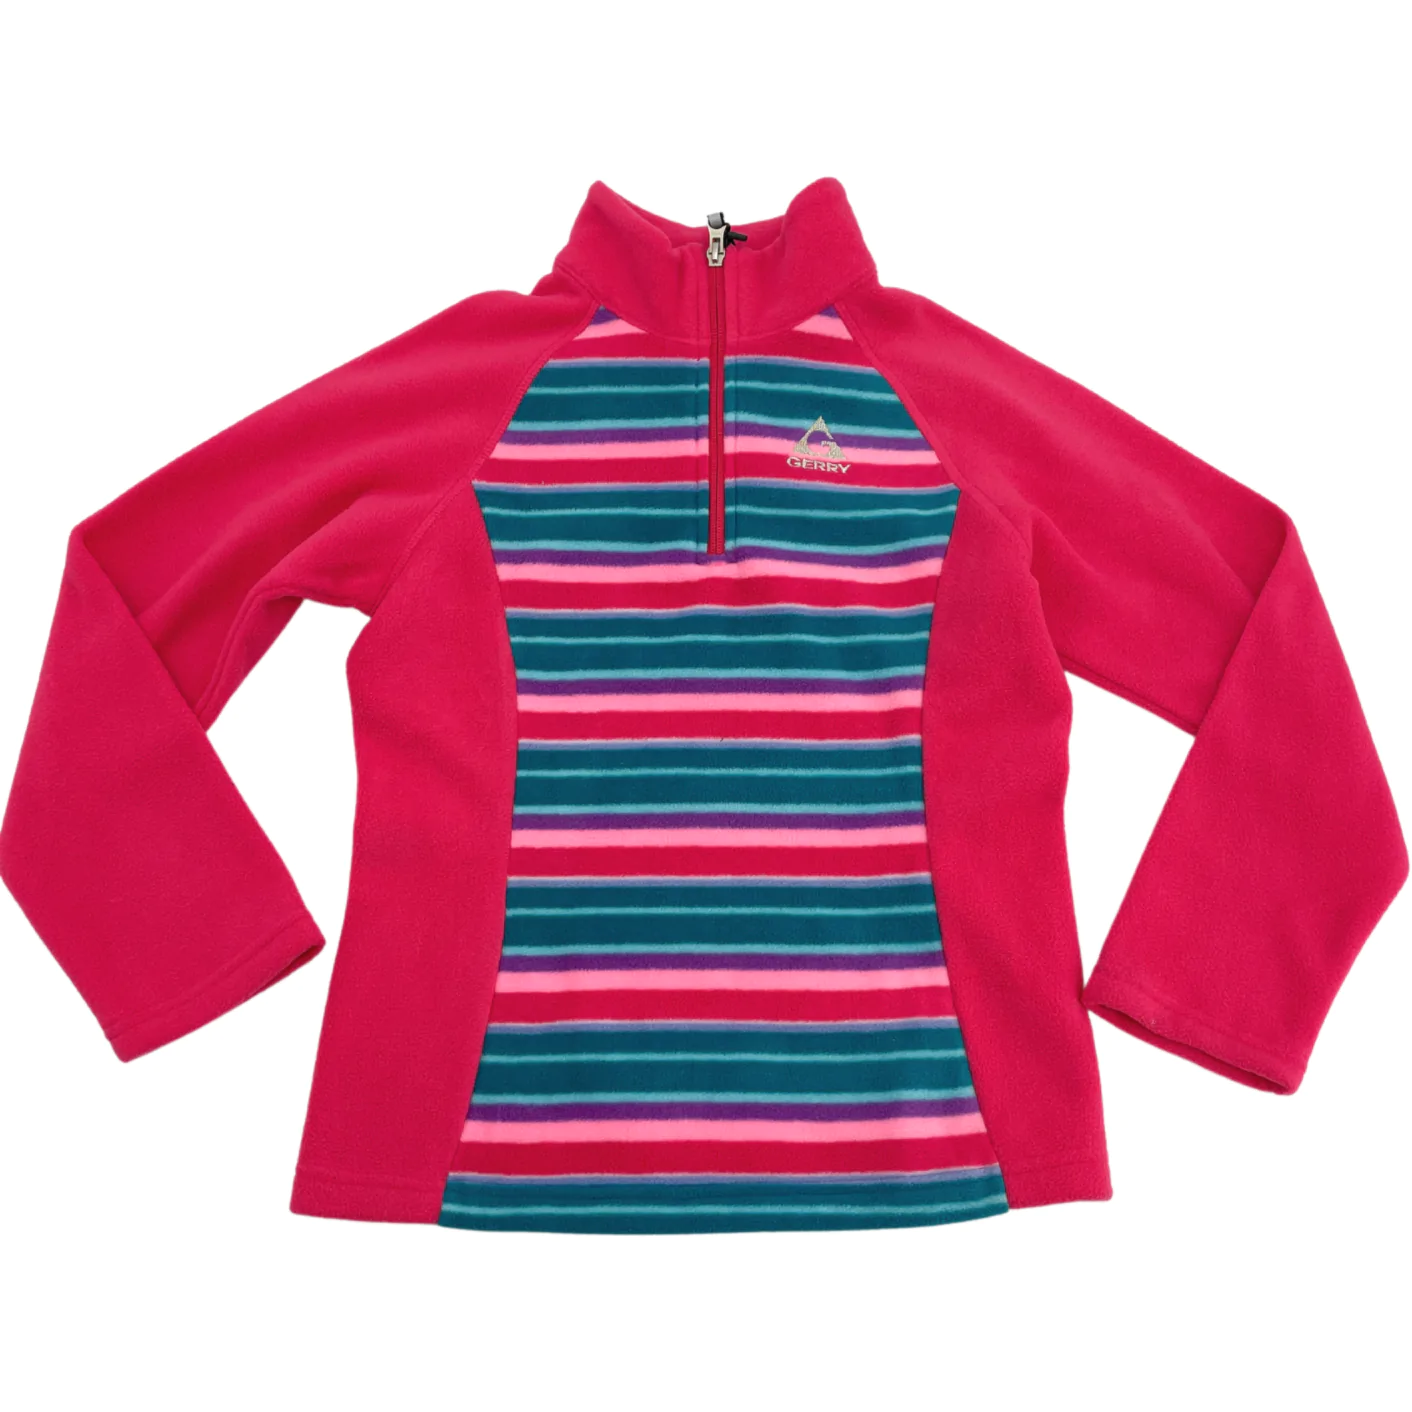 Gerry Girl's Fleece Pullover Sweater / Quarter Zip Sweater / Pink with Stripes / Size Large